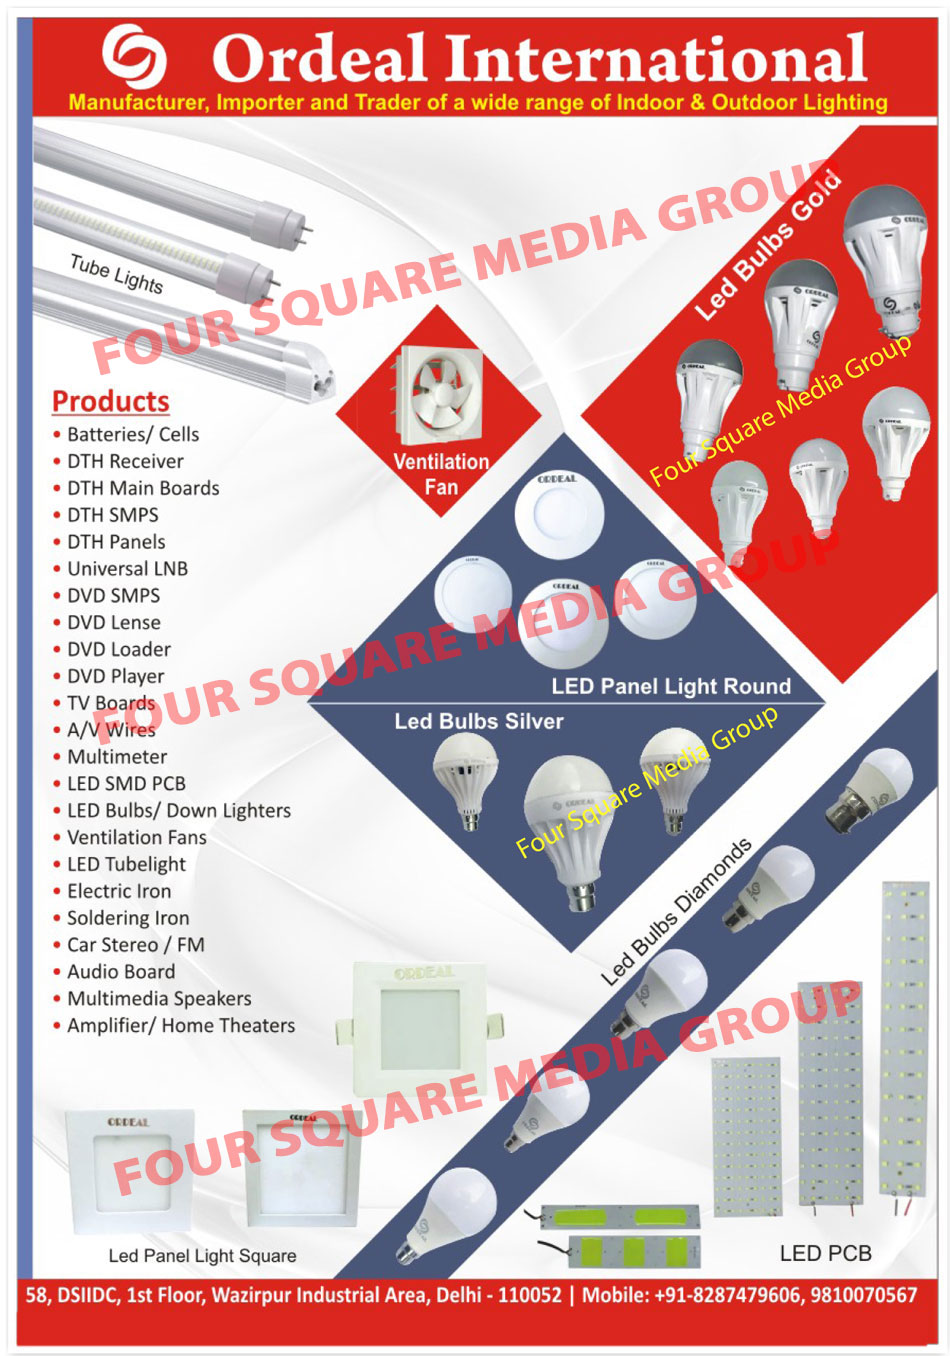 Led Lights, Indoor Lights, Outdoor Lights, Led Tube Lights, Led Bulbs, Ventilation Fan, Round Led Panel Lights, Led PCB, Led Printed Circuit Board, Square Led Panel Lights, Amplifier, Home Theater, Multimedia Speakers, Multi Media Speakers, Audio Board, Car Stereo, Car FM, Soldering Iron, Electric Iron, Led Down Lighter, Led SMD PCB, Led SMD Printed Circuit Board, Multimeter, Multi Meter, AV Wires, TV Boards, DVD Player, DVD Loader, DVD Lenses, DVD SMPS, Universal LNB, DTH Panels, DTH SMPS, DTH Main Boards, DTH Receiver, Batteries, Cells, Battery